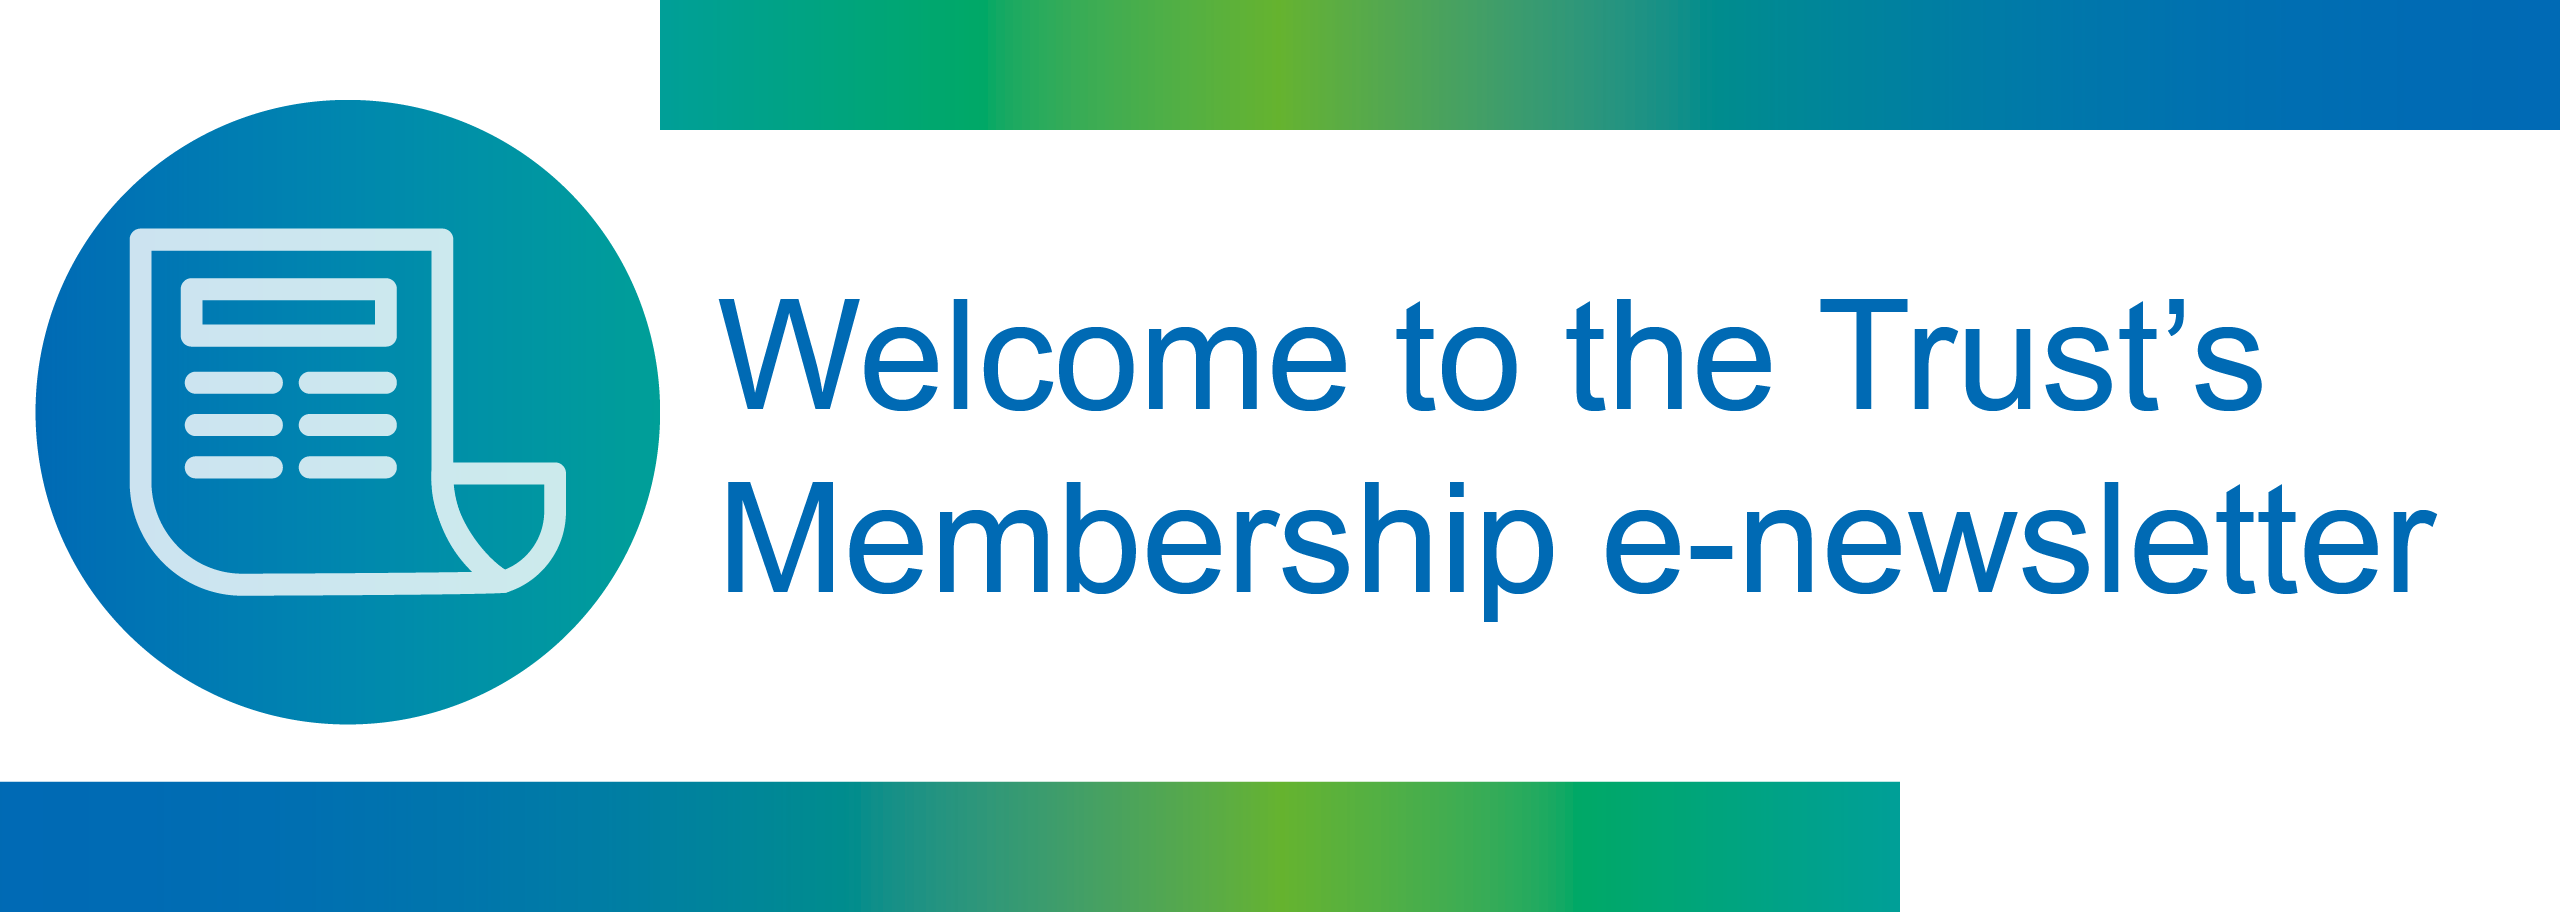 Welcome to the Trust's Membership e-newsletter